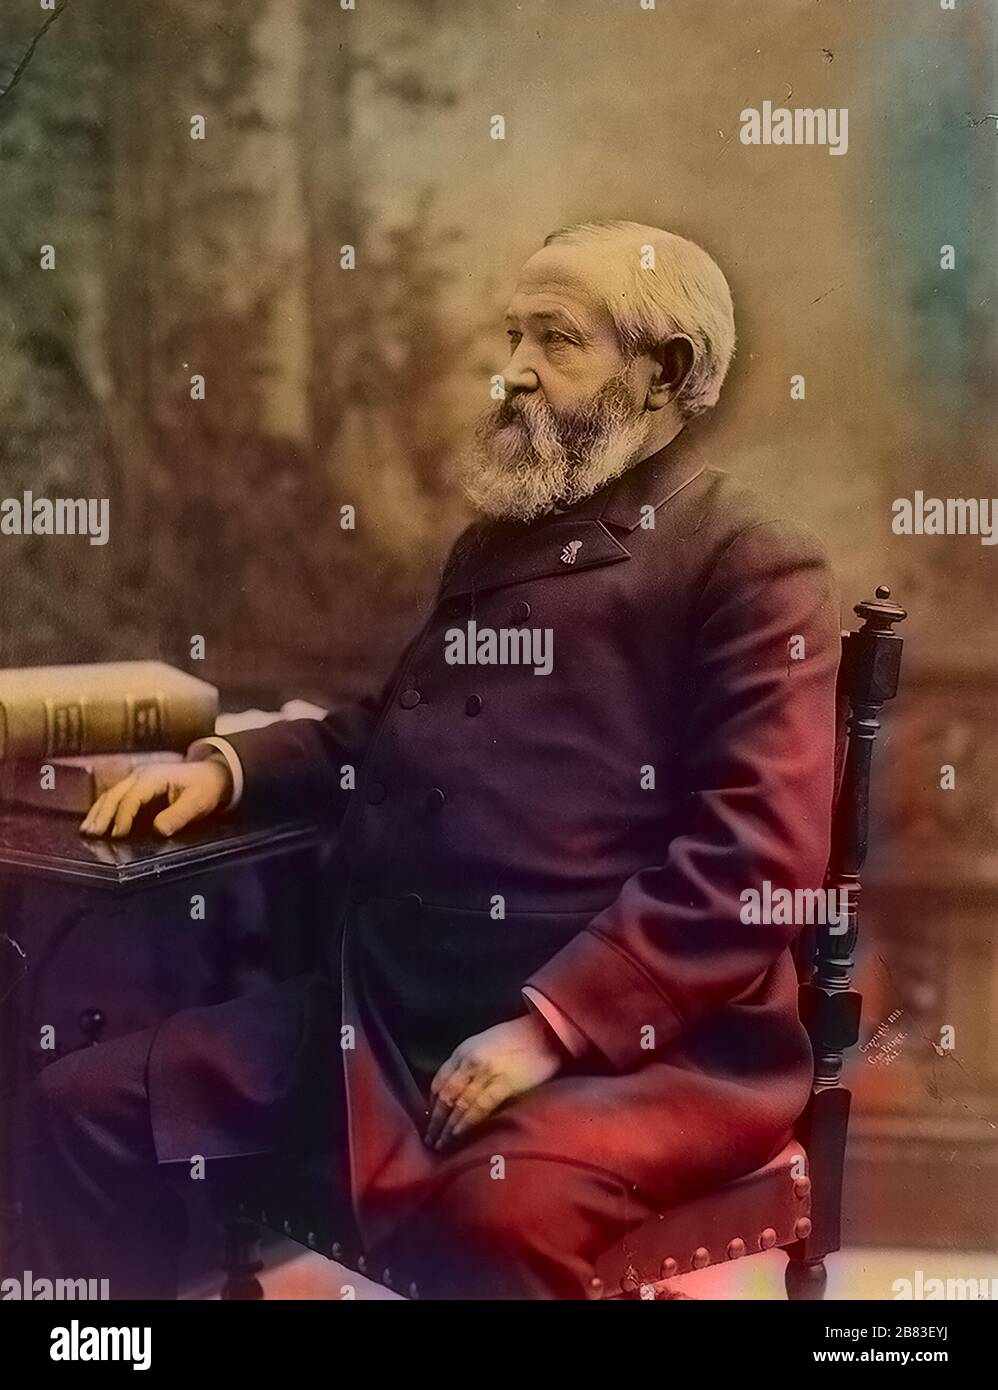 Three quarter length portrait of American President Benjamin Harrison, profile view, seated in chair, 1888. Courtesy Library of Congress. Note: Image has been digitally colorized using a modern process. Colors may not be period-accurate. () Stock Photo